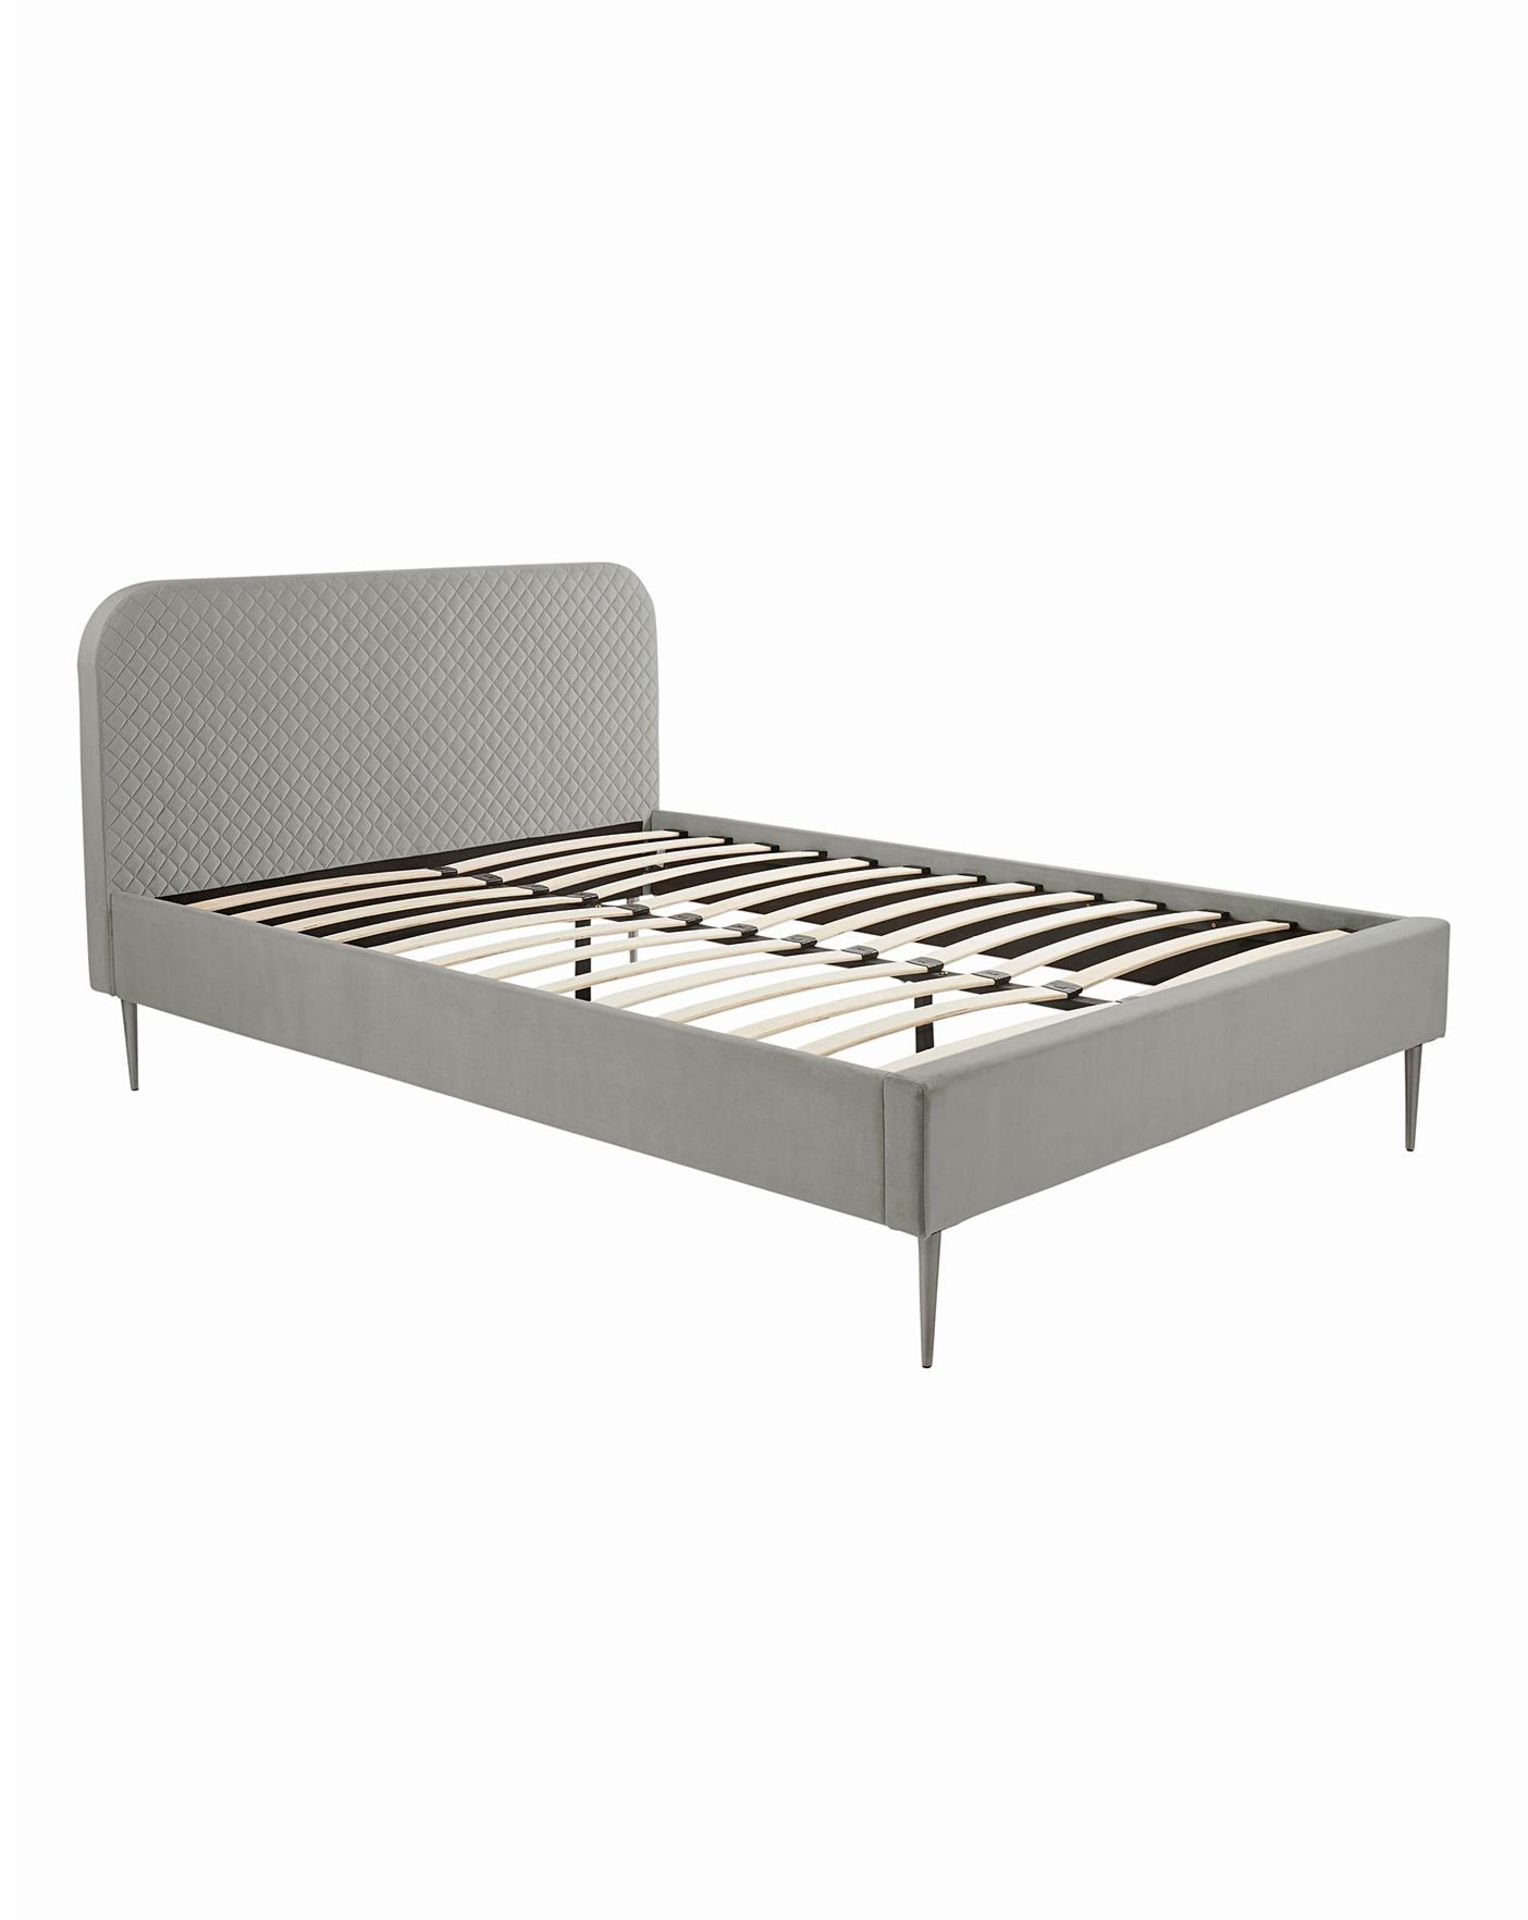 BRAND NEW ARDEN Quilted DOUBLE Bed Frame. PEWTER. RRP £339 EACH. The Arden Quilted Bed is the - Image 2 of 2